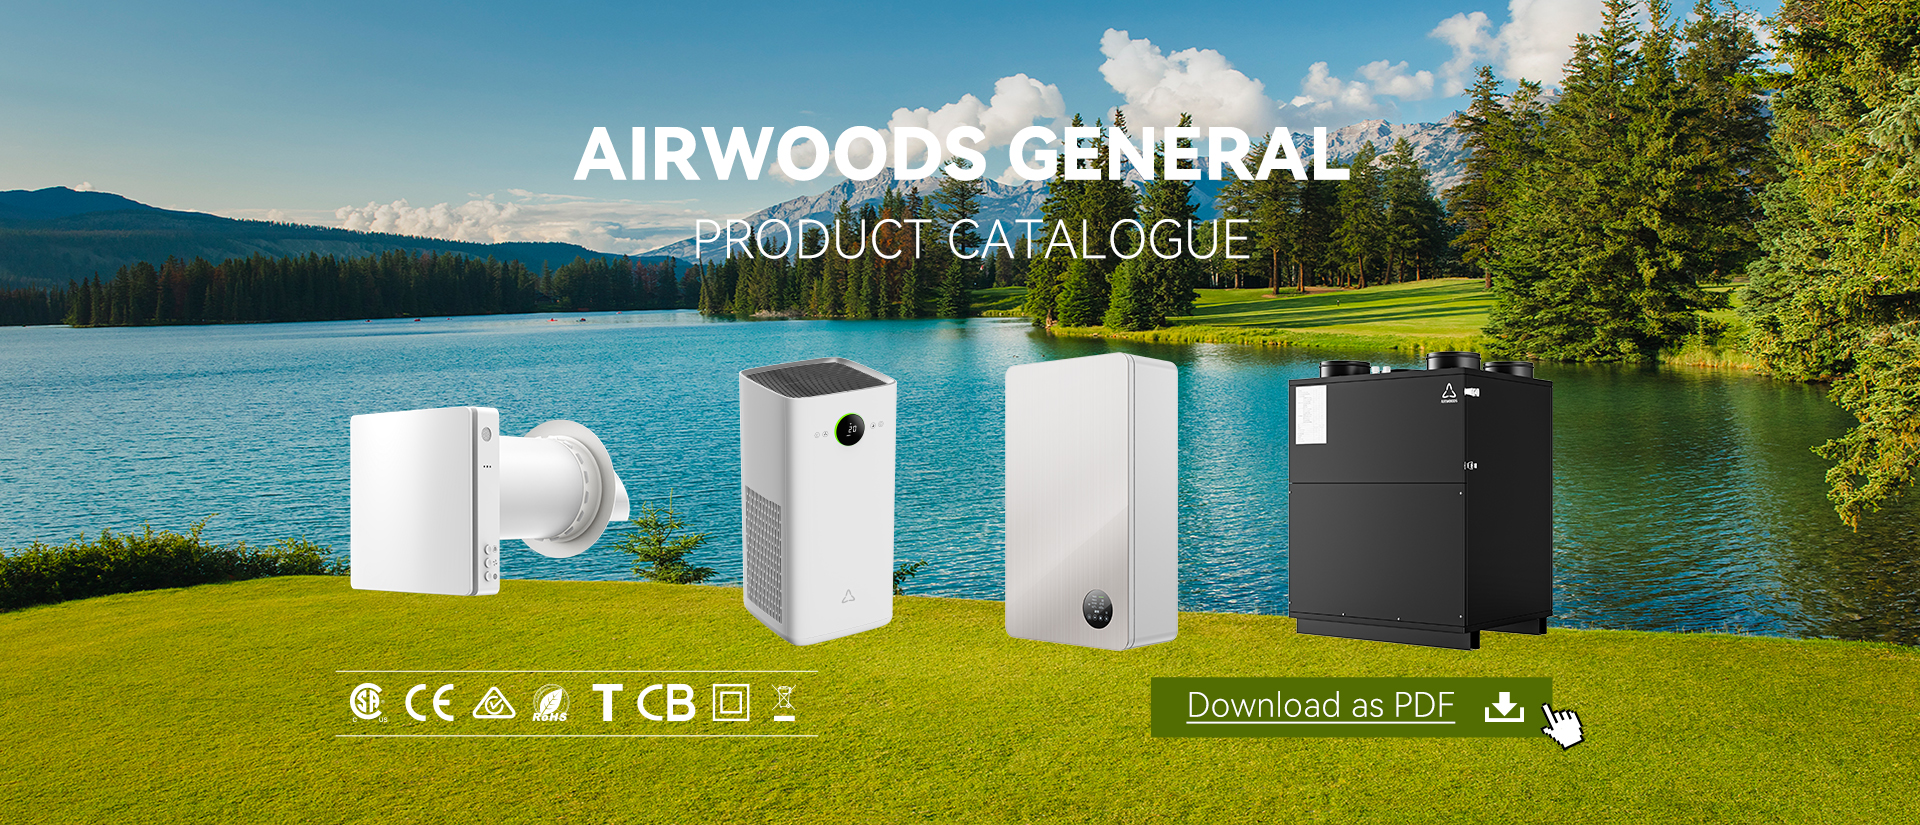 AIRWOODS-General-Product-Catalogue